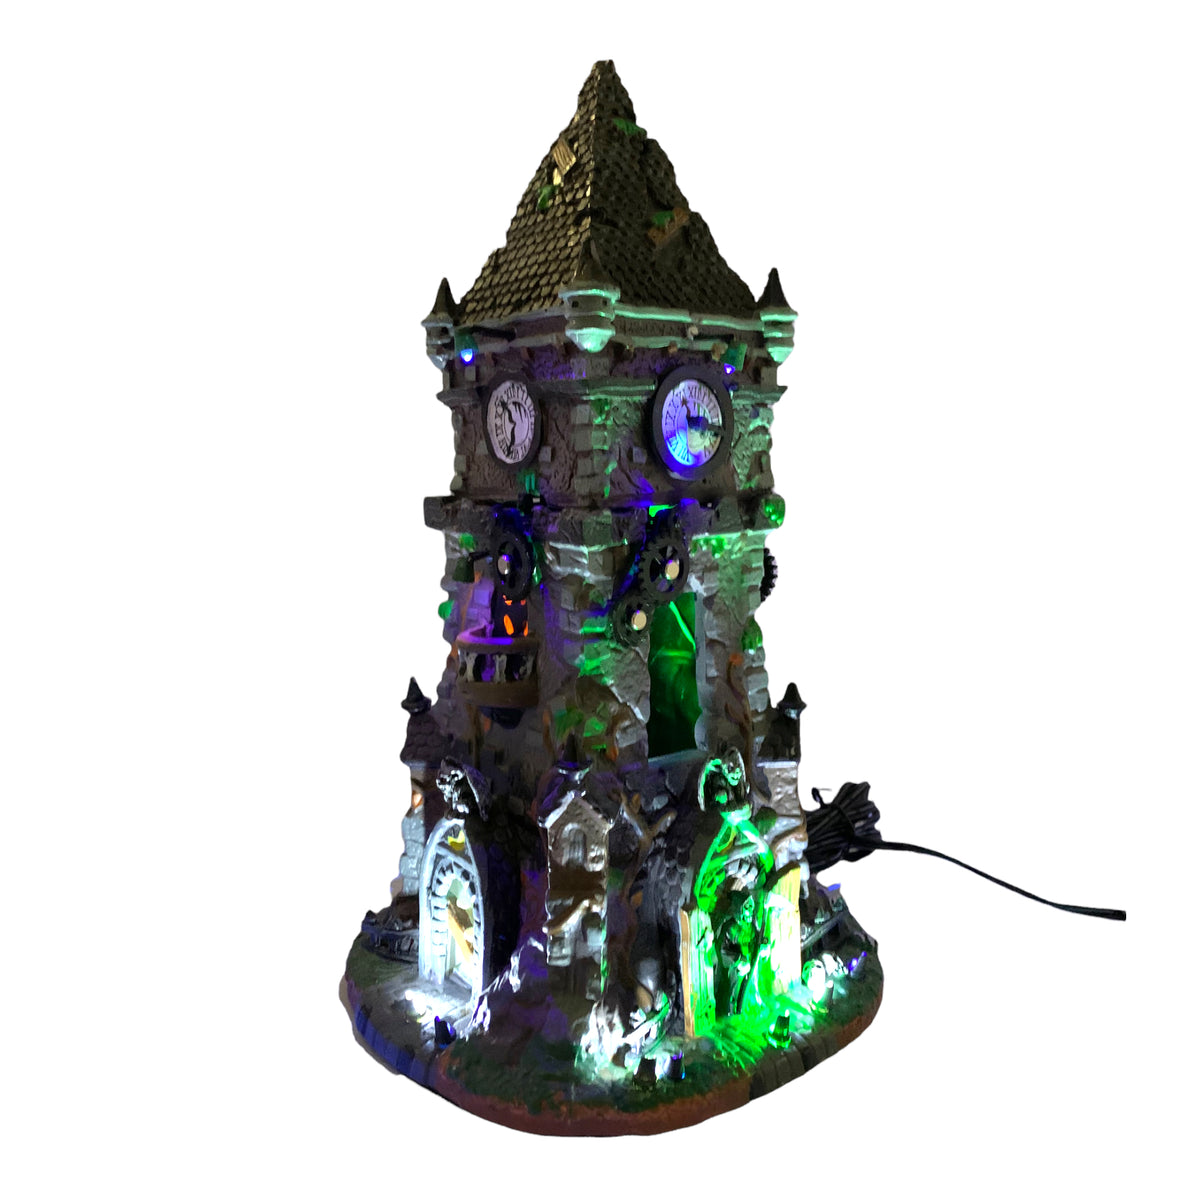 Lemax Spooky Town Haunted Clock Tower #35531